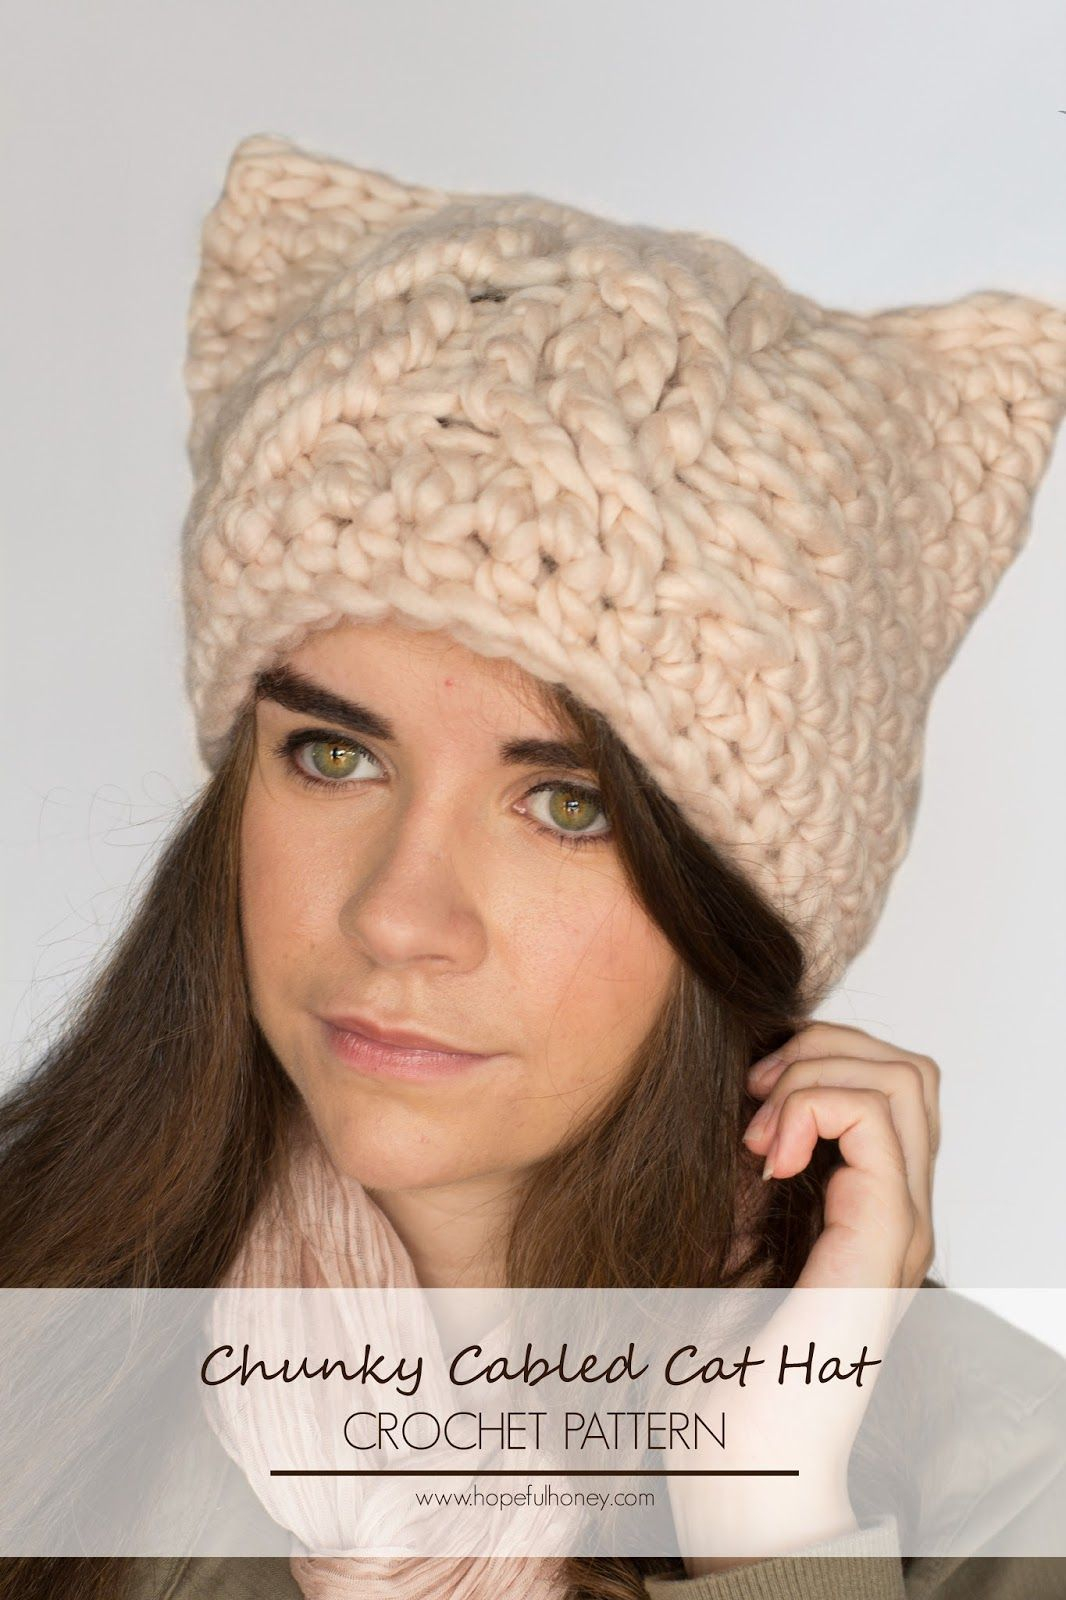 Crochet Cat Hat Pattern Chunky Cabled Cat Hat Crochet Pattern Crochet Patterns Pinterest